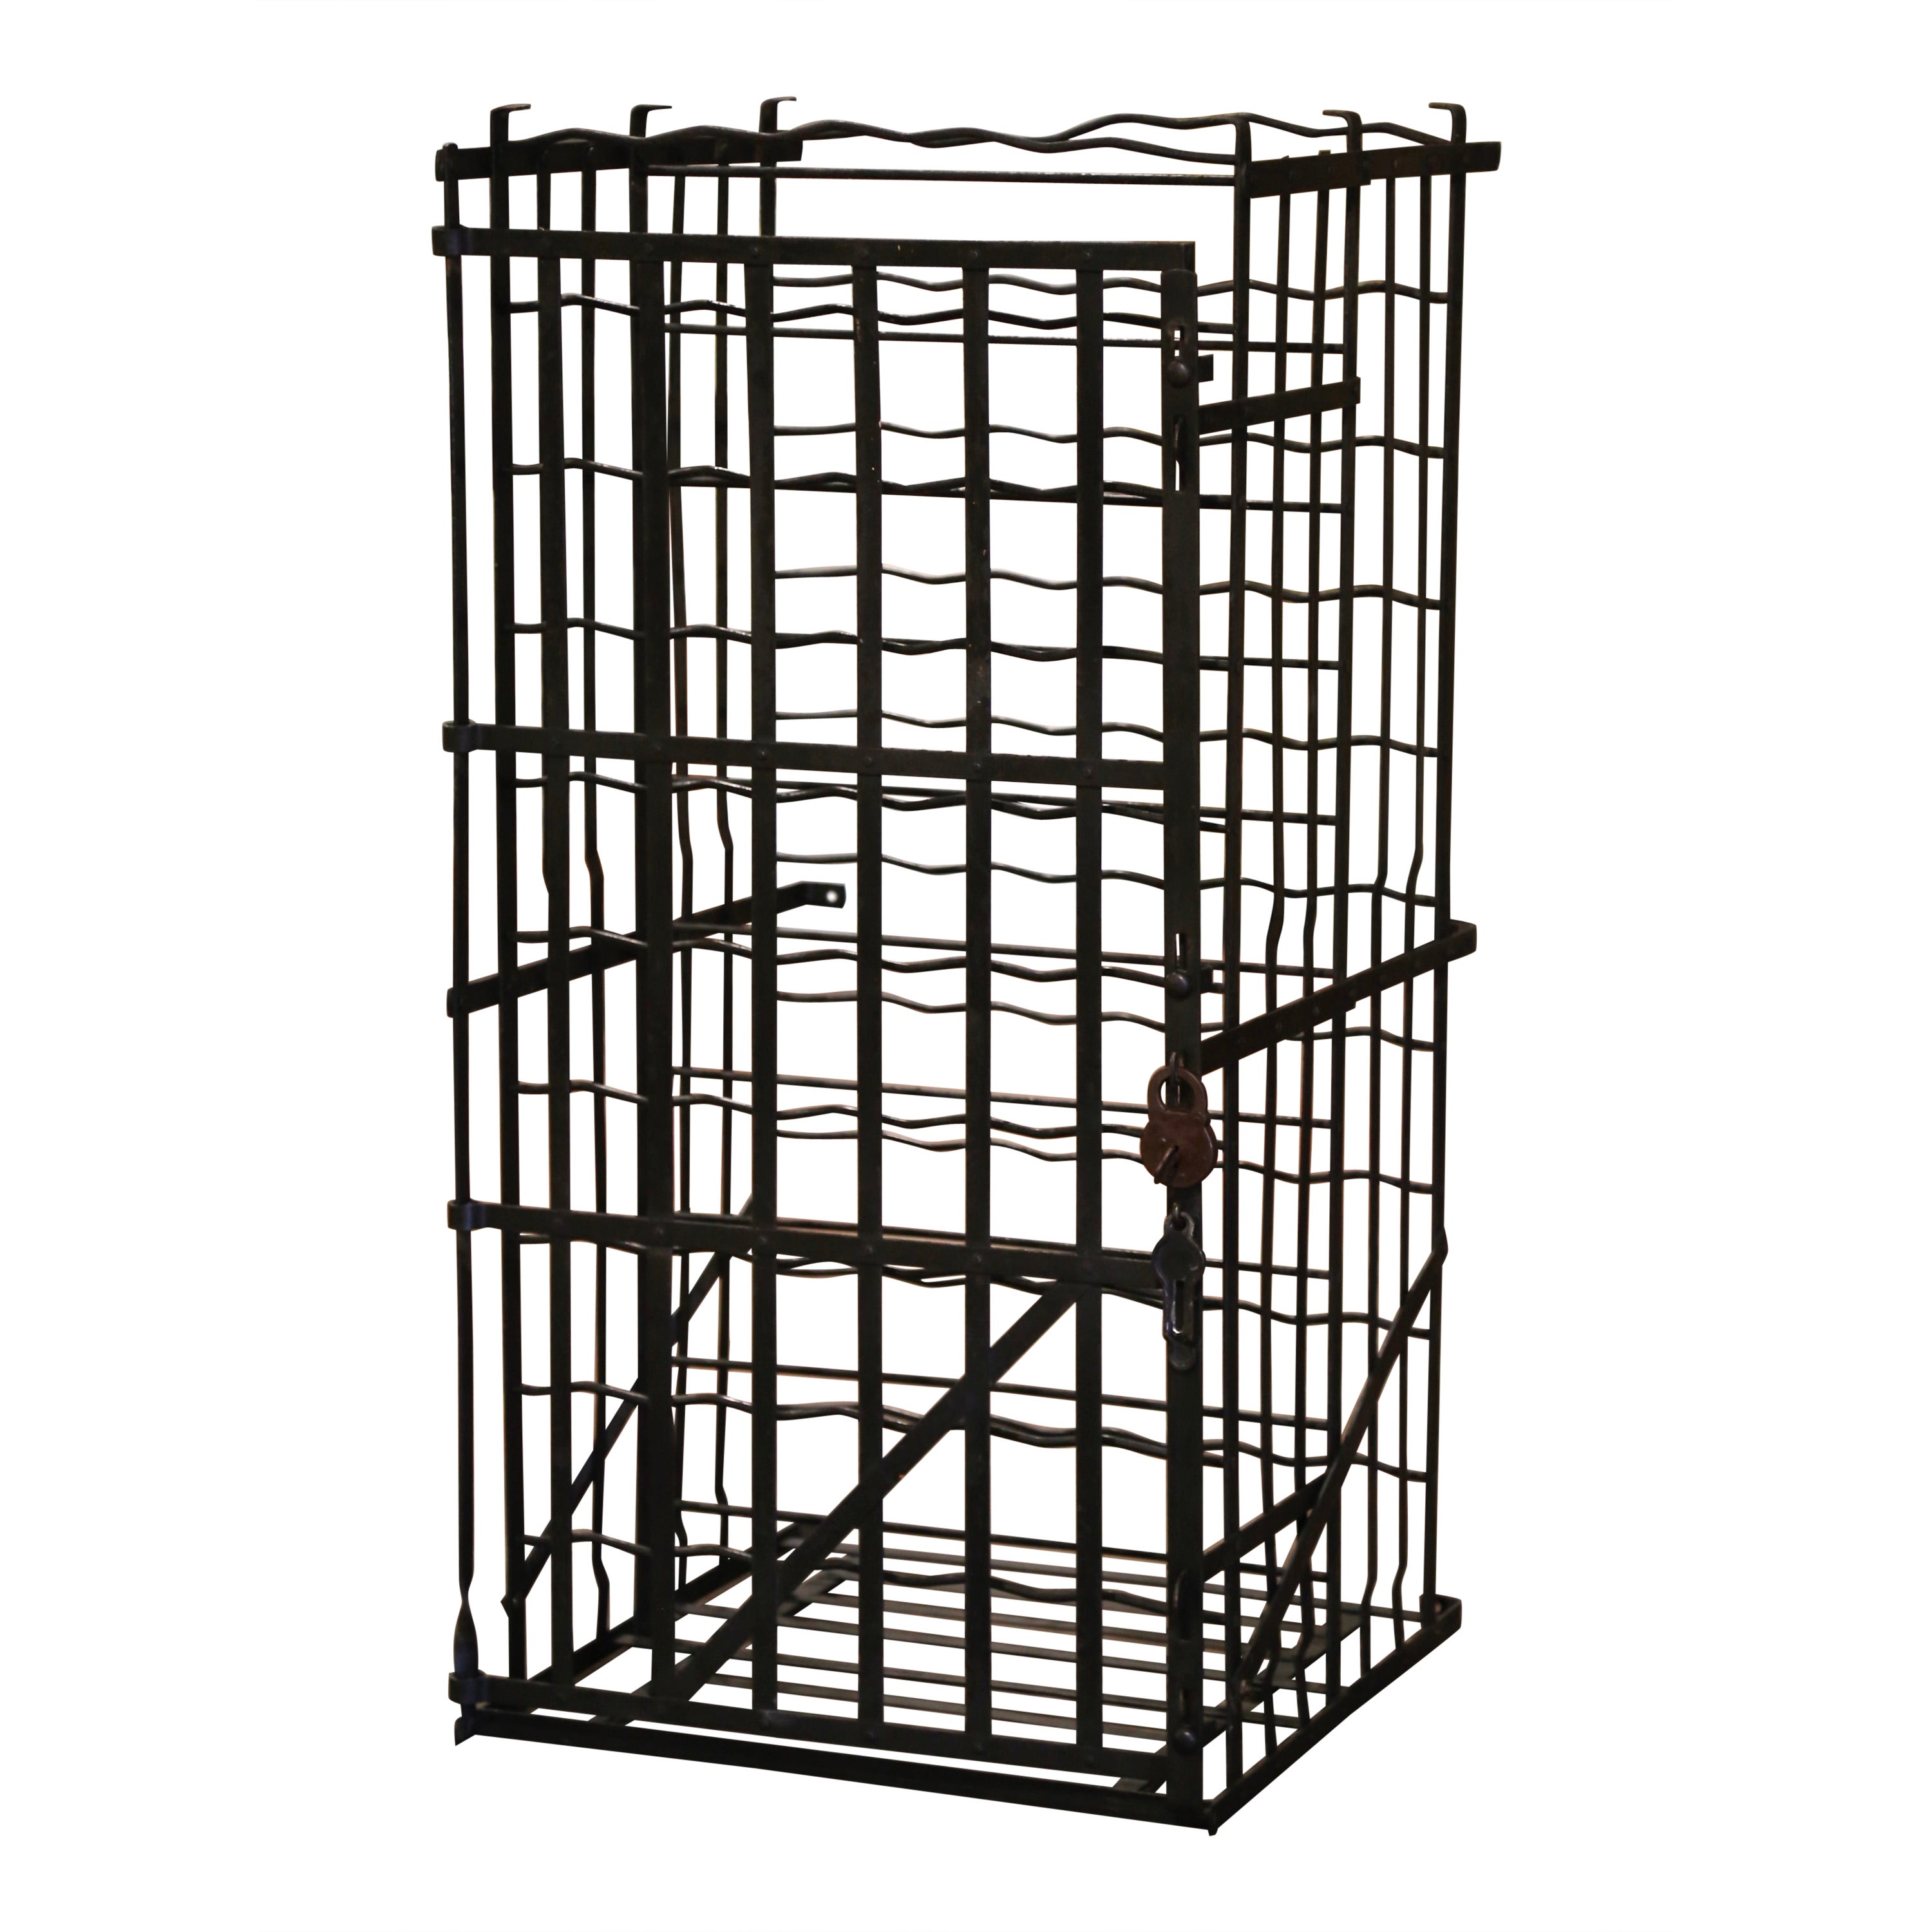 19th Century French Iron Seventy Two-Bottle Wine Cellar Rack Cage from Burgundy